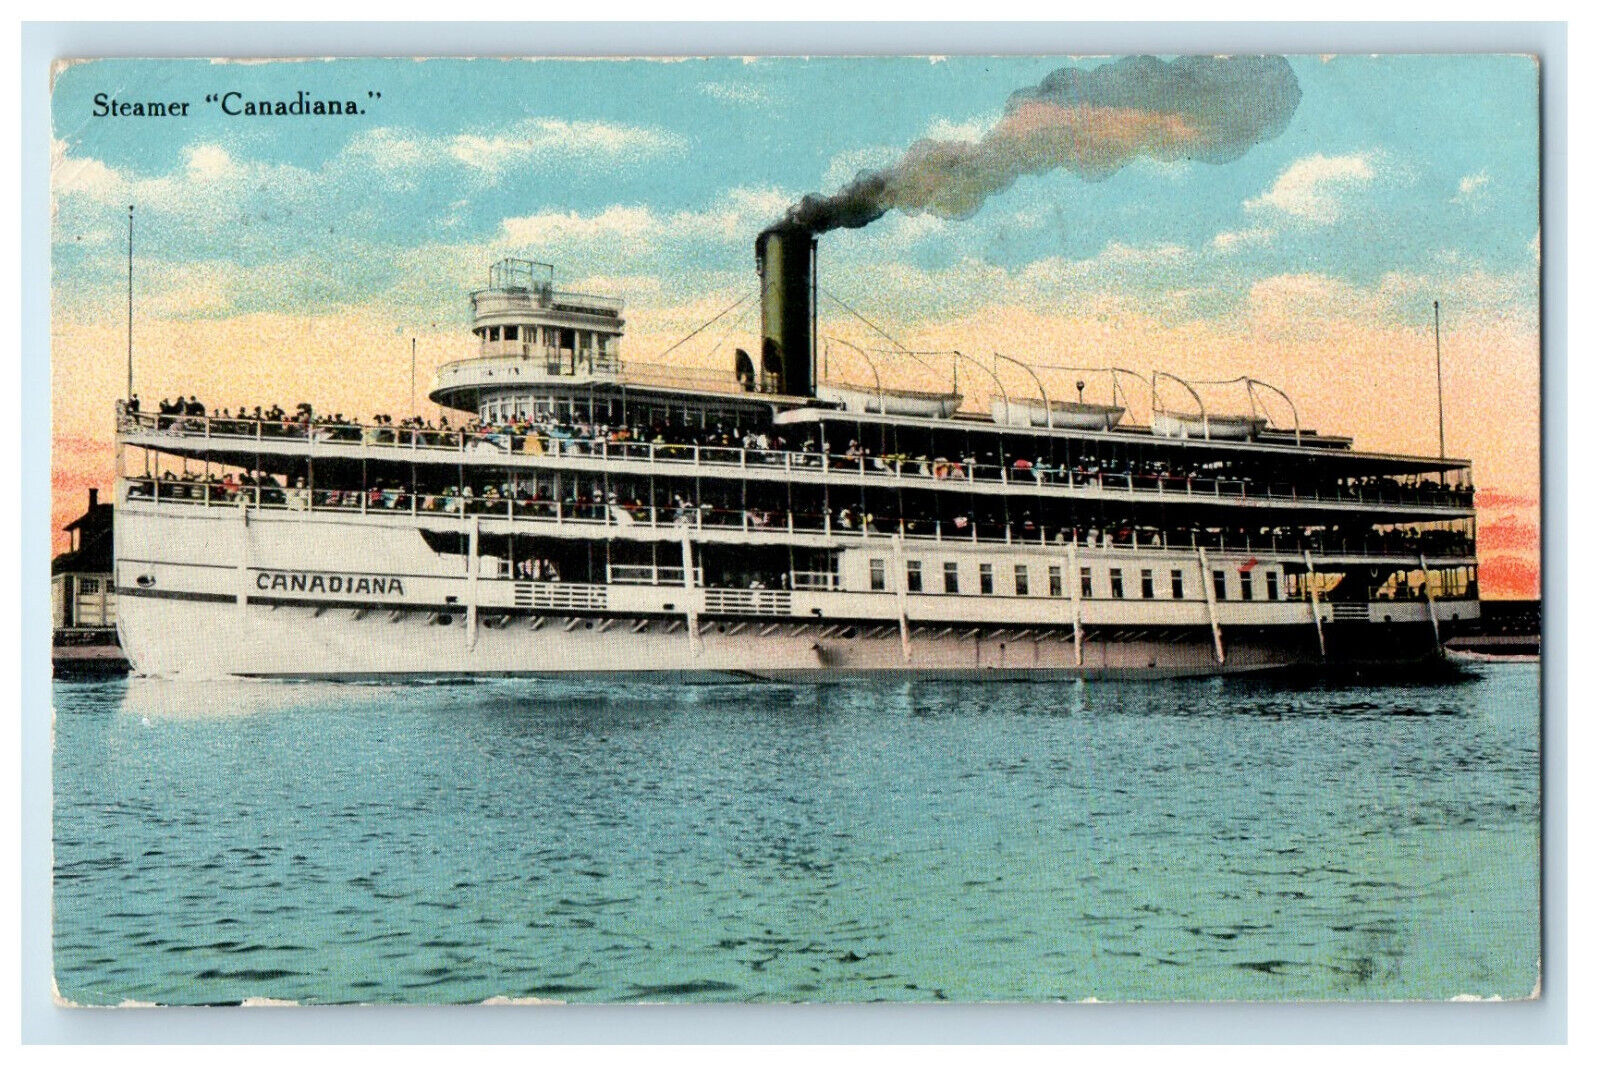 1911 View of Passengers, Smoke, Steamer Canadiana, Canada Posted Postcard